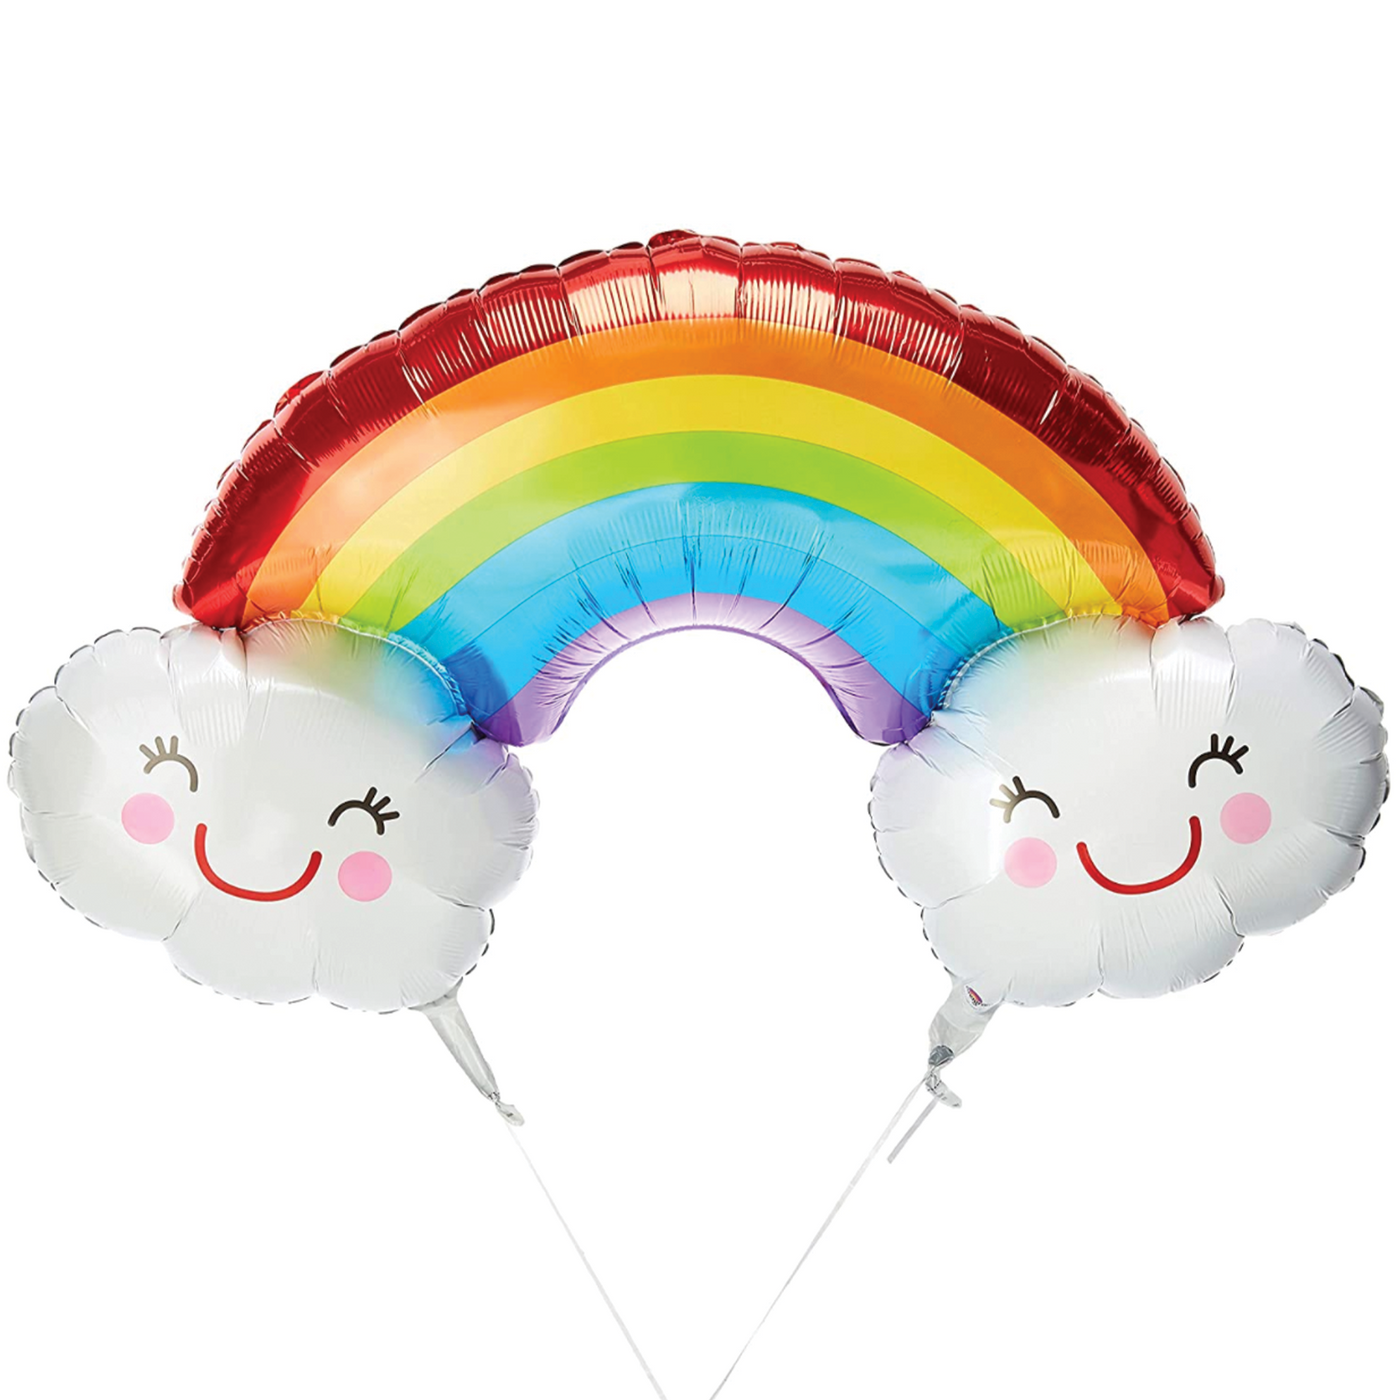 Rainbow Balloon with Clouds